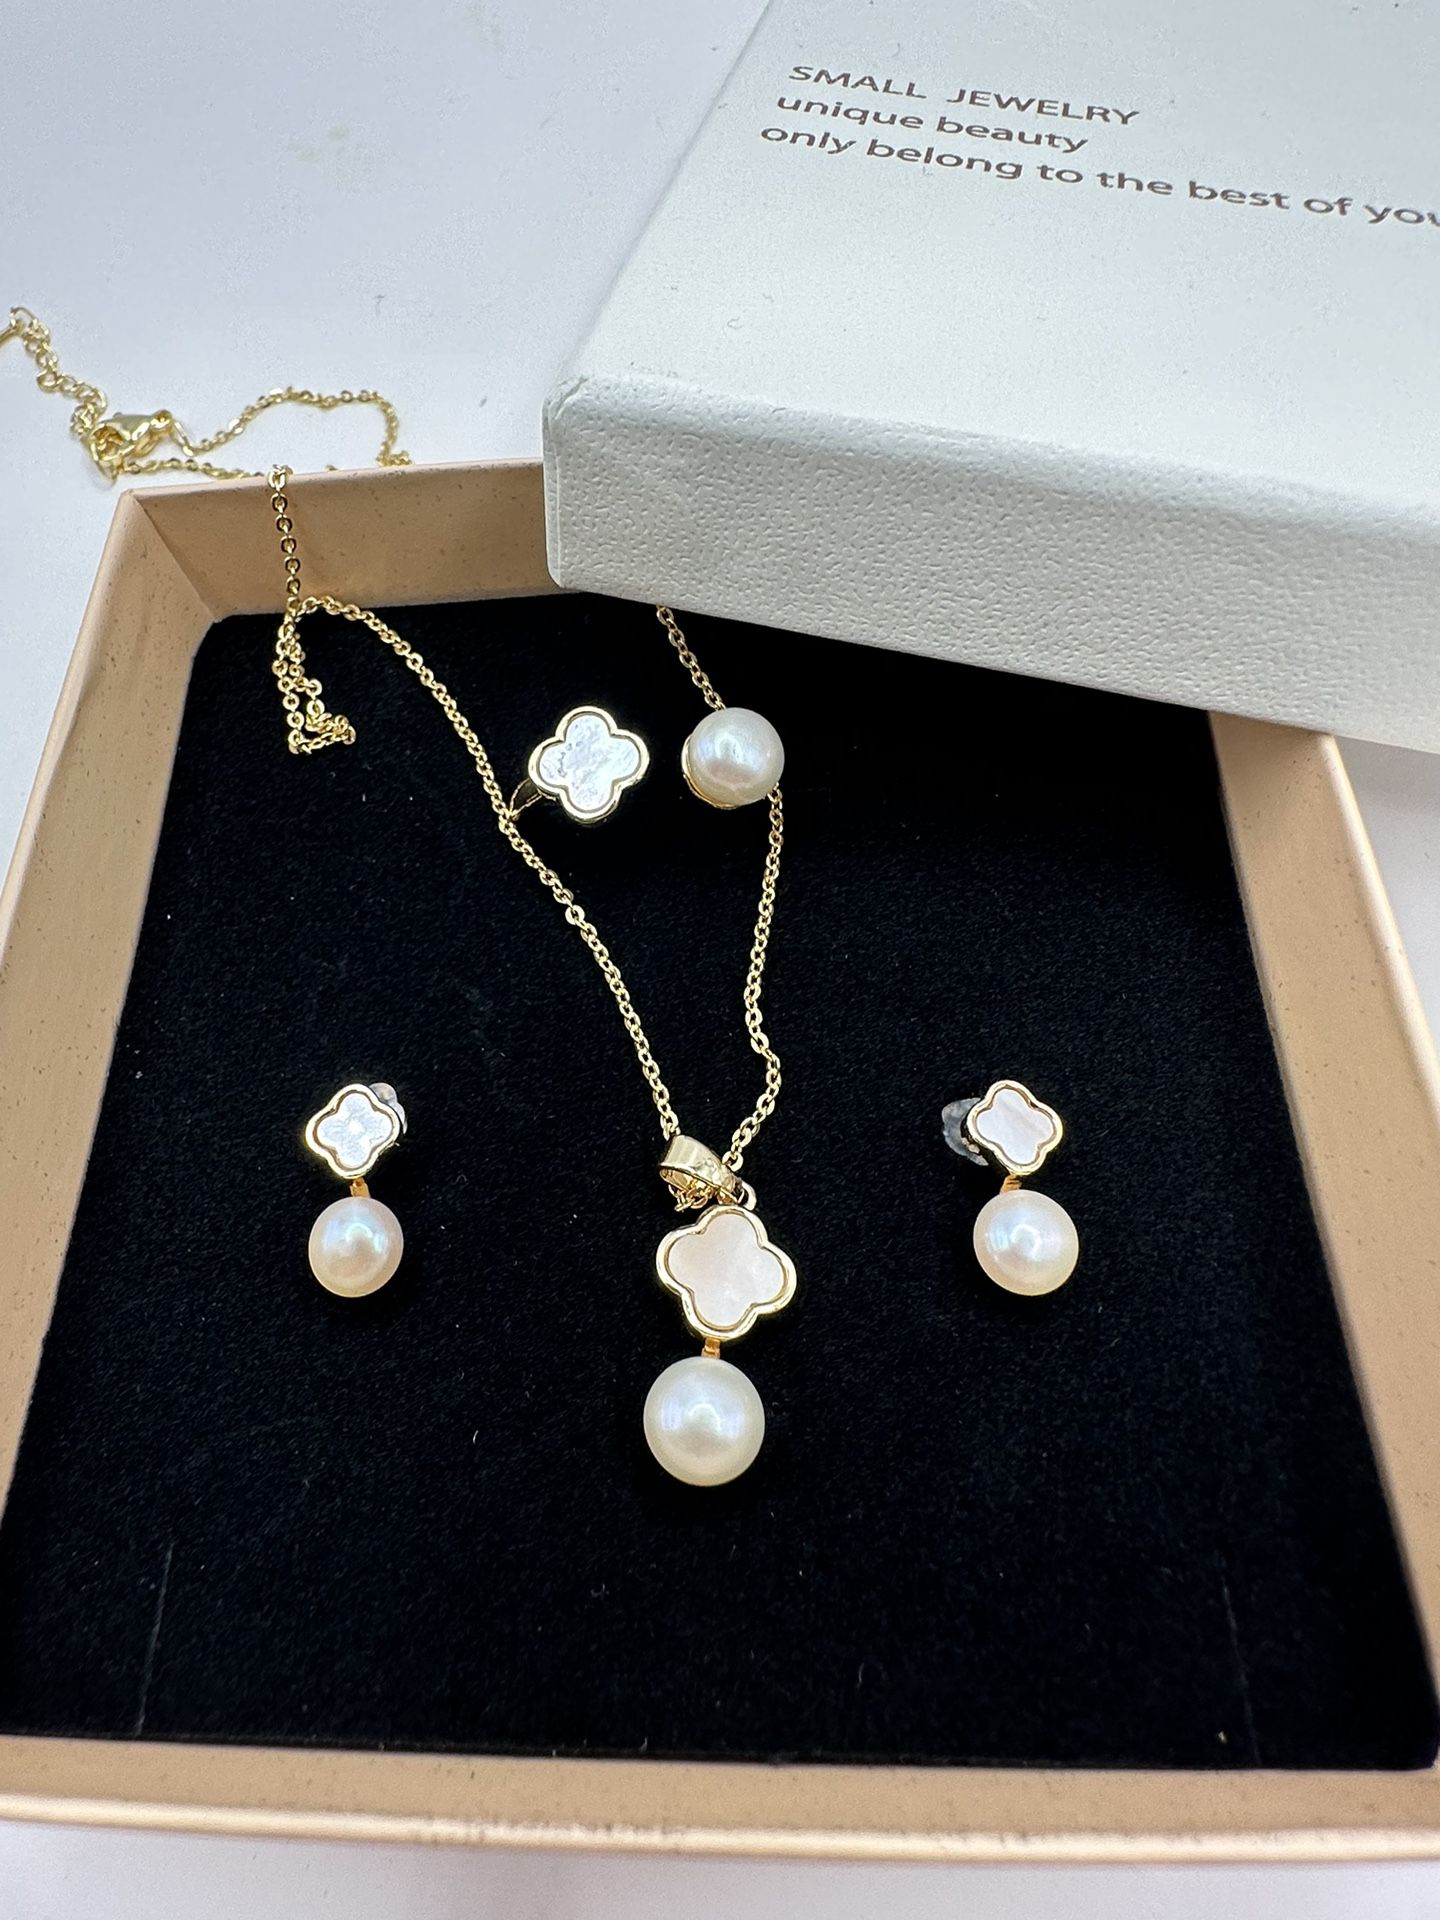 NEW Clover and natural pearl set of 3 (earrings, pendant and ring) 14k. gold plated gift for Mother’s Day 